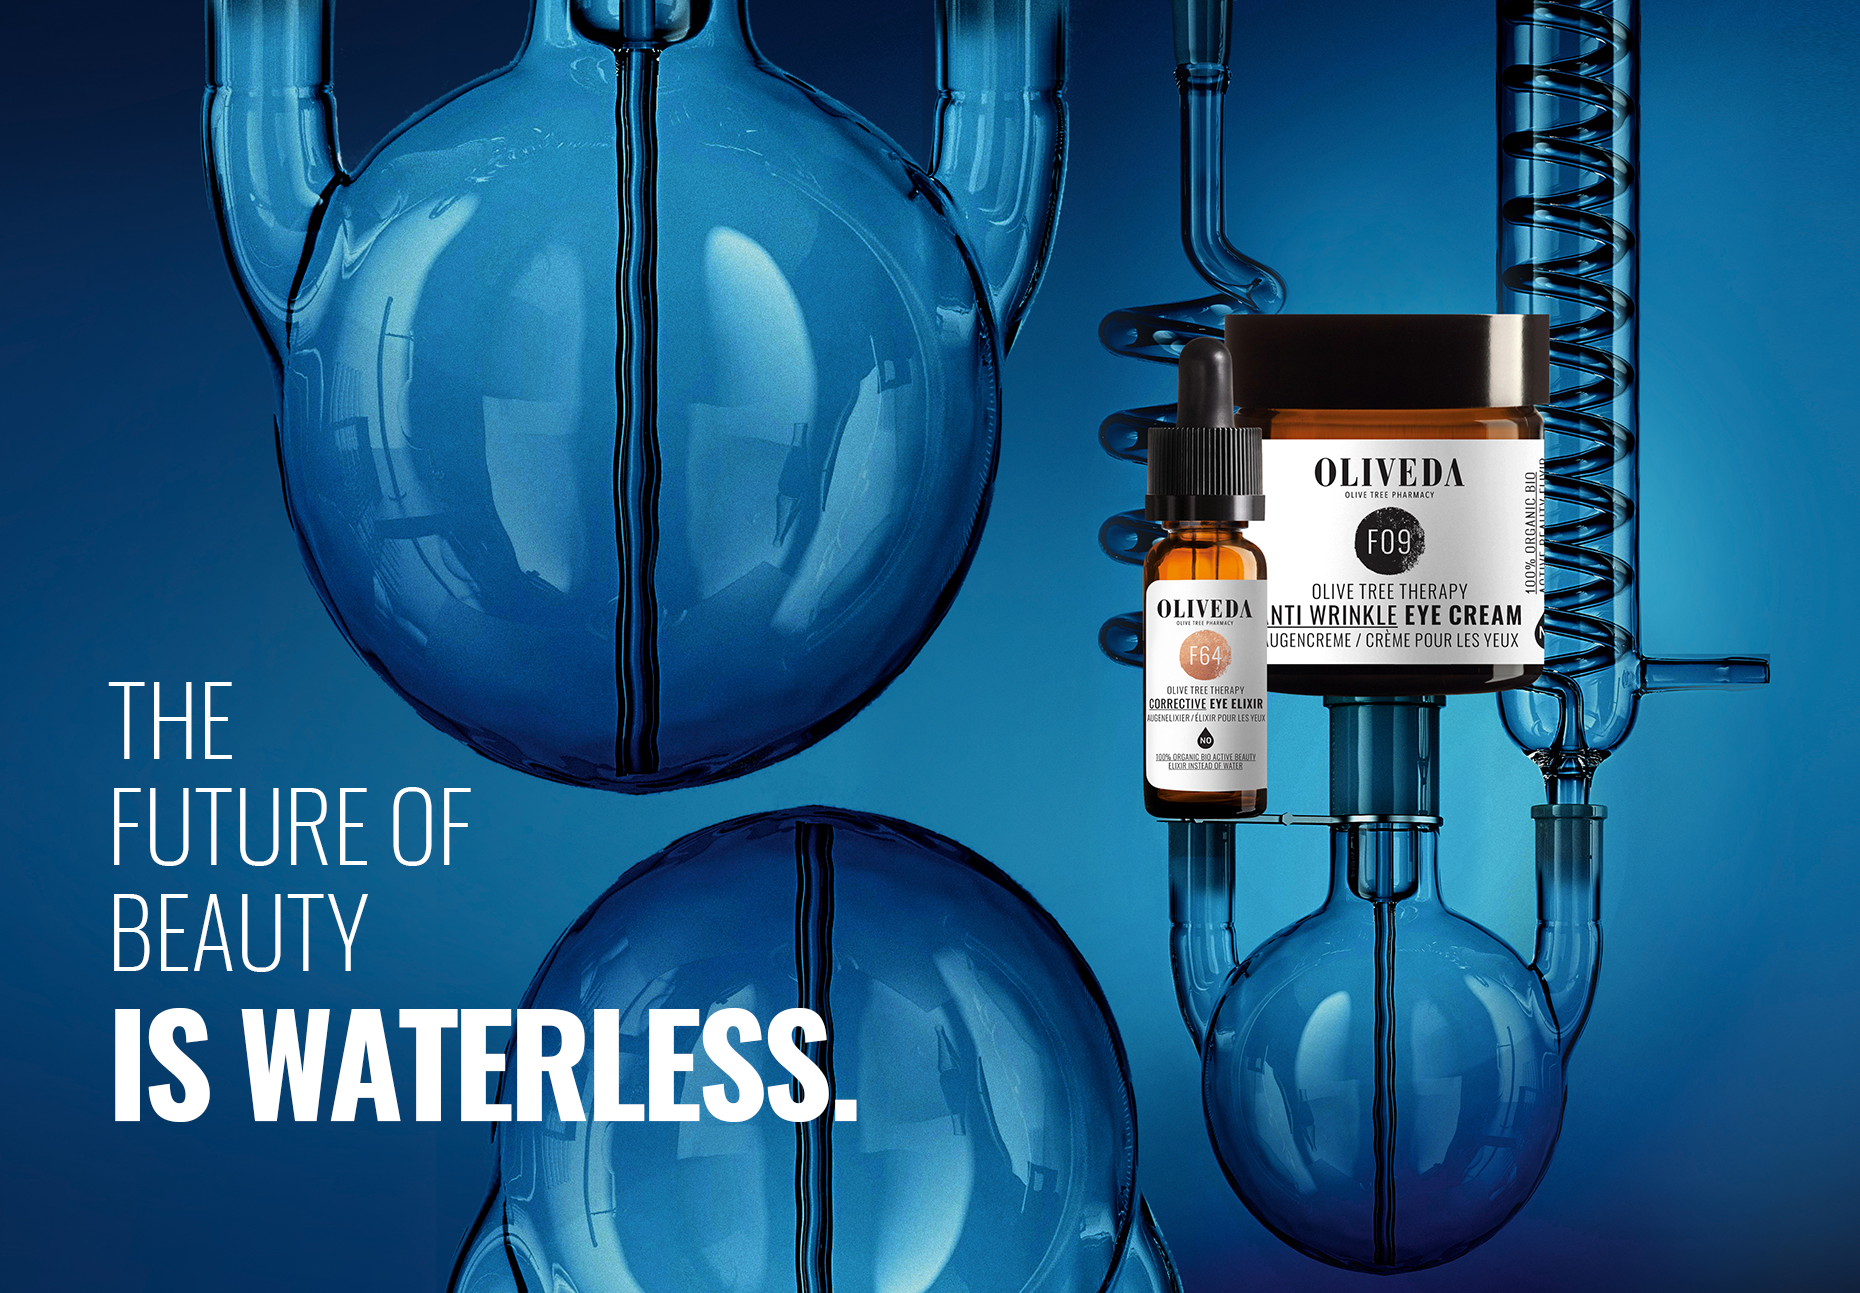 The Future of Beauty: How Waterless is Shaping the Industry